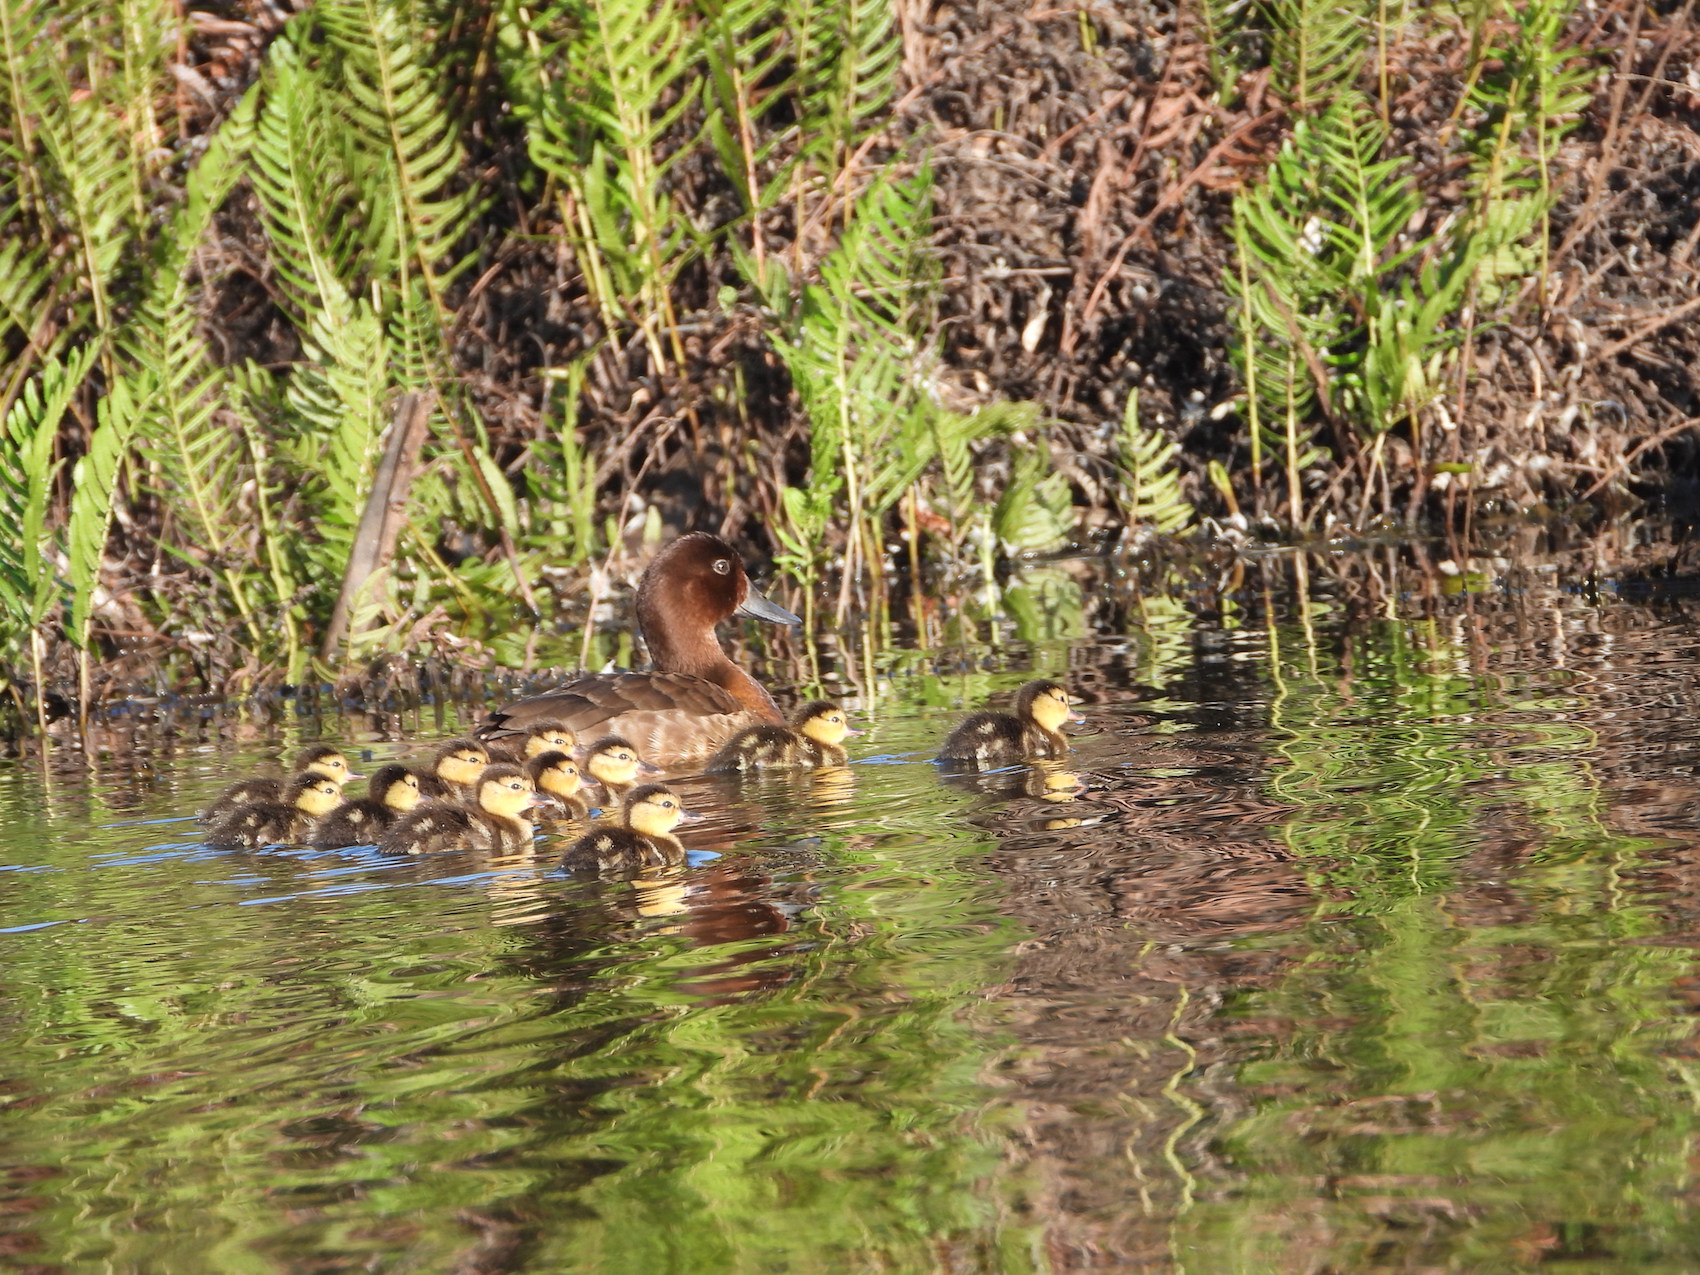 Previously_released_pochard_with_ducklings_on_Lake_Sofia_22-10-2021._Photo_Durrell.JPG